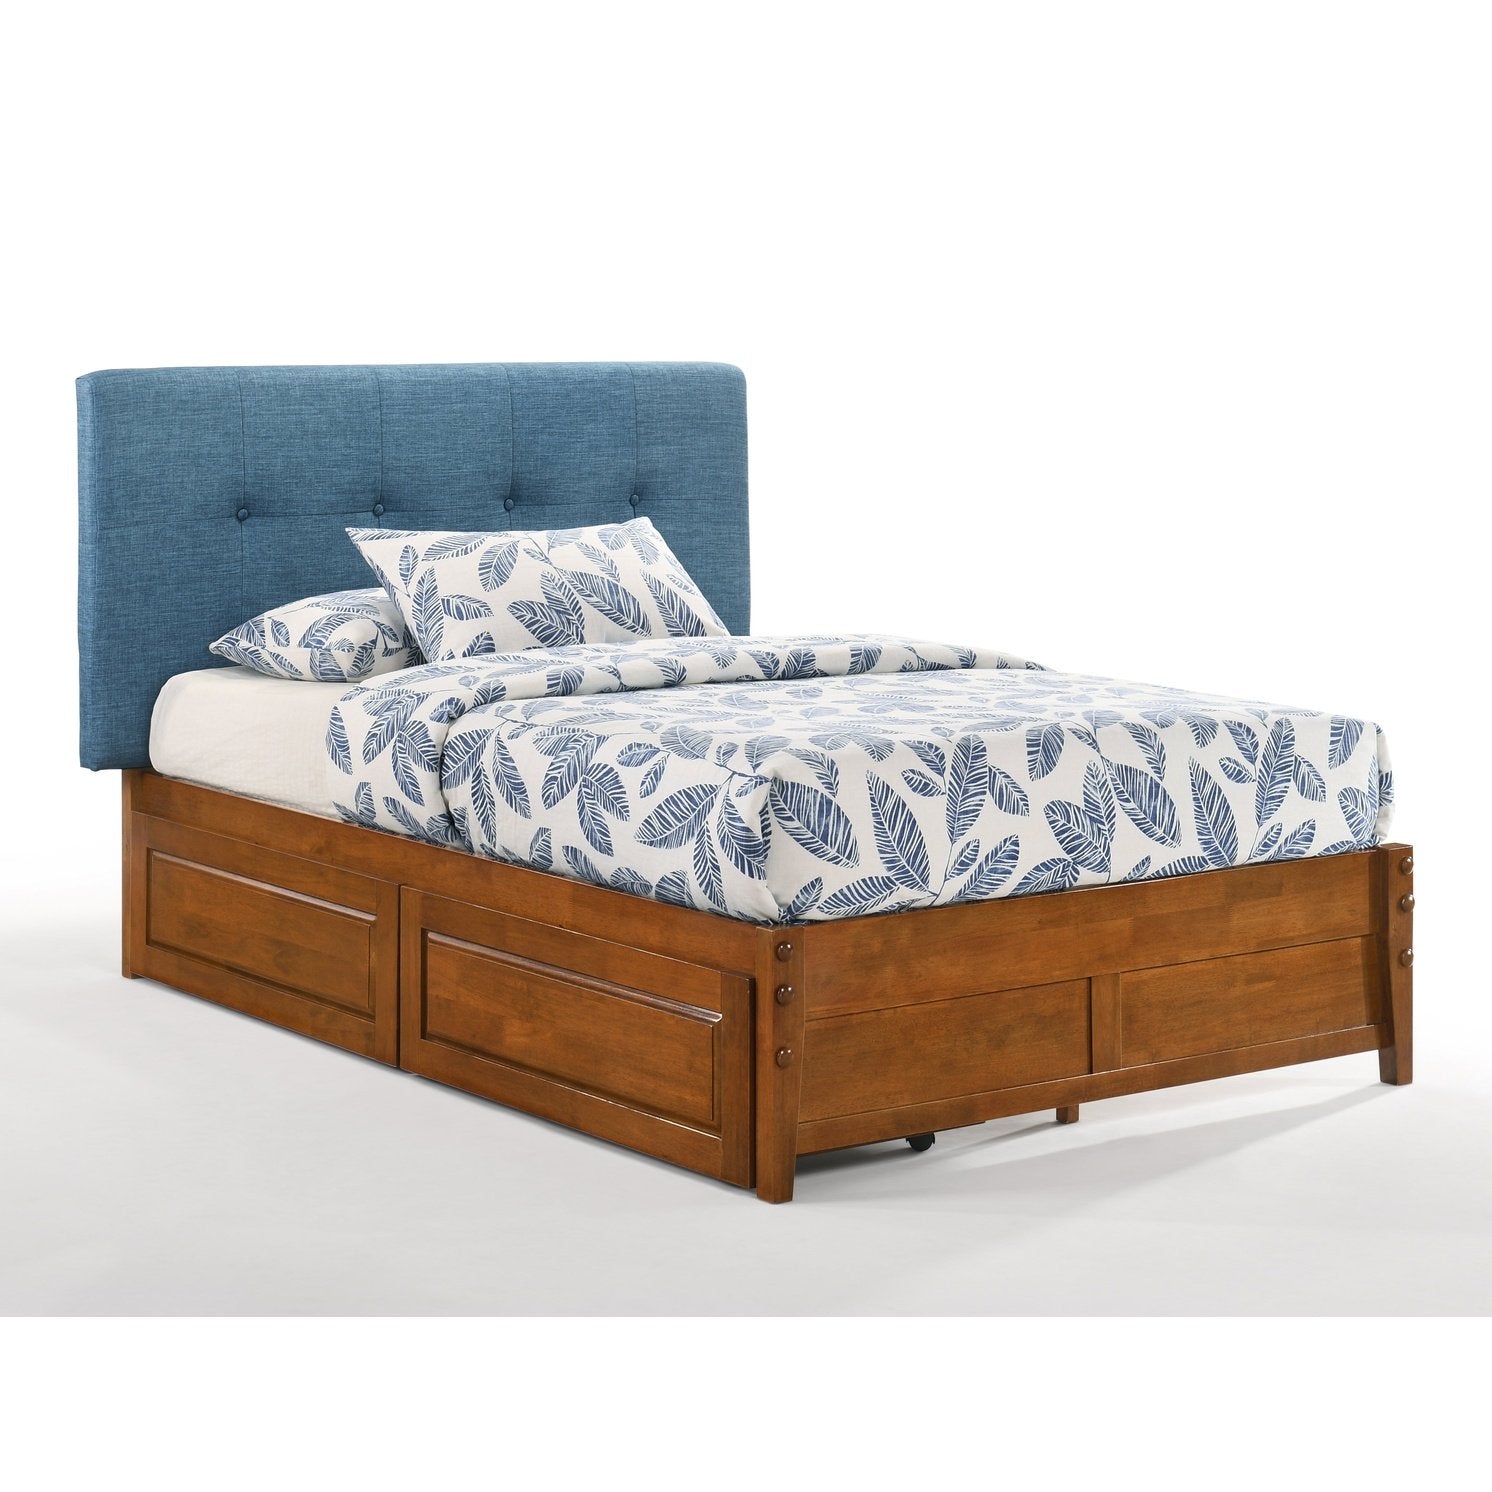 Night and Day Furniture Paprika Complete Bed (Dual Series) (K-Series) - New Star Living